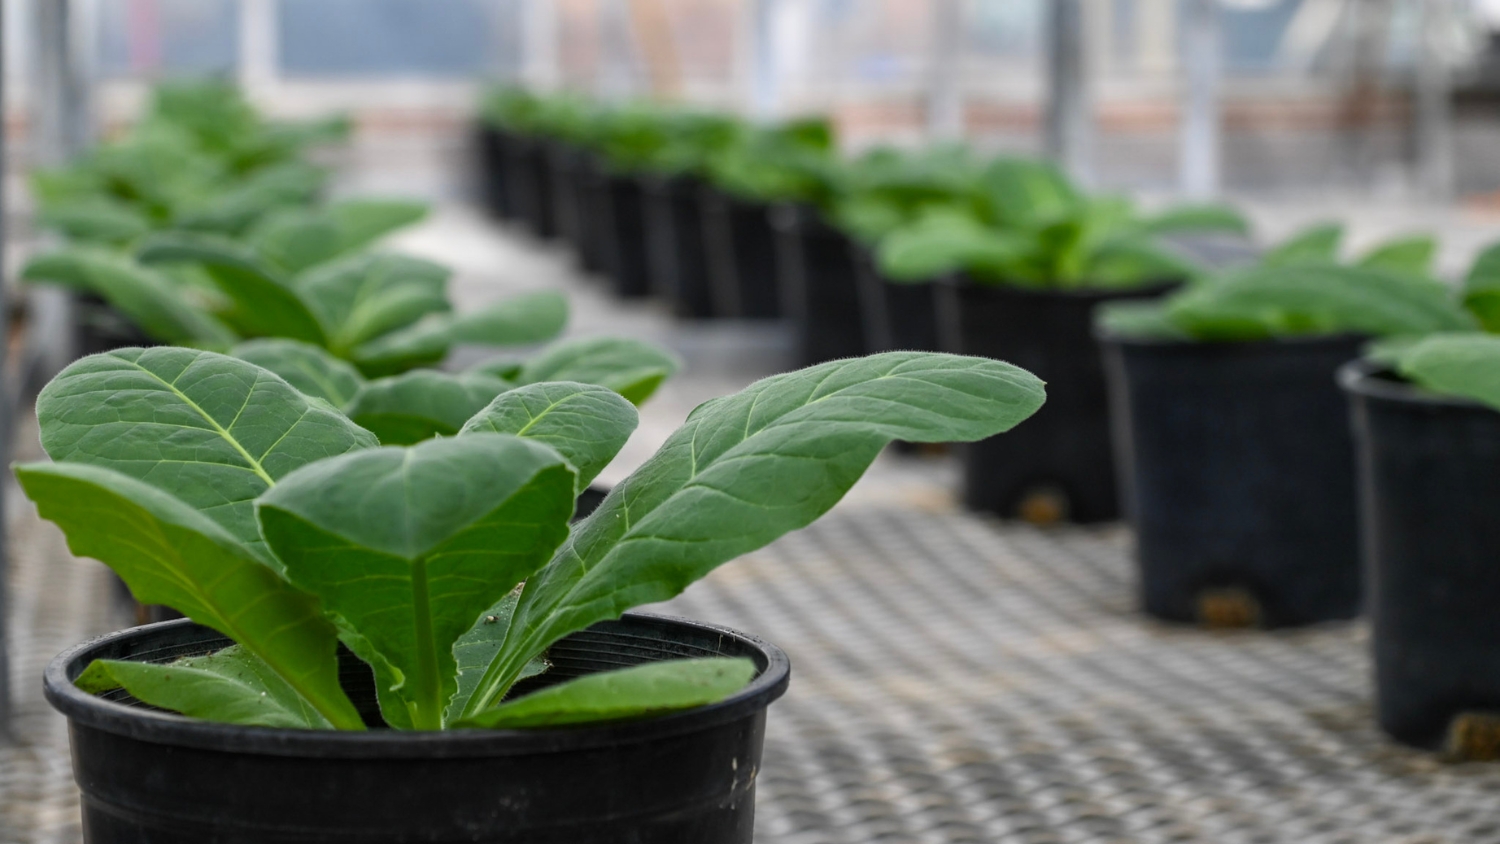 Rows of potted tobacco plants in an NC State greenhouse.